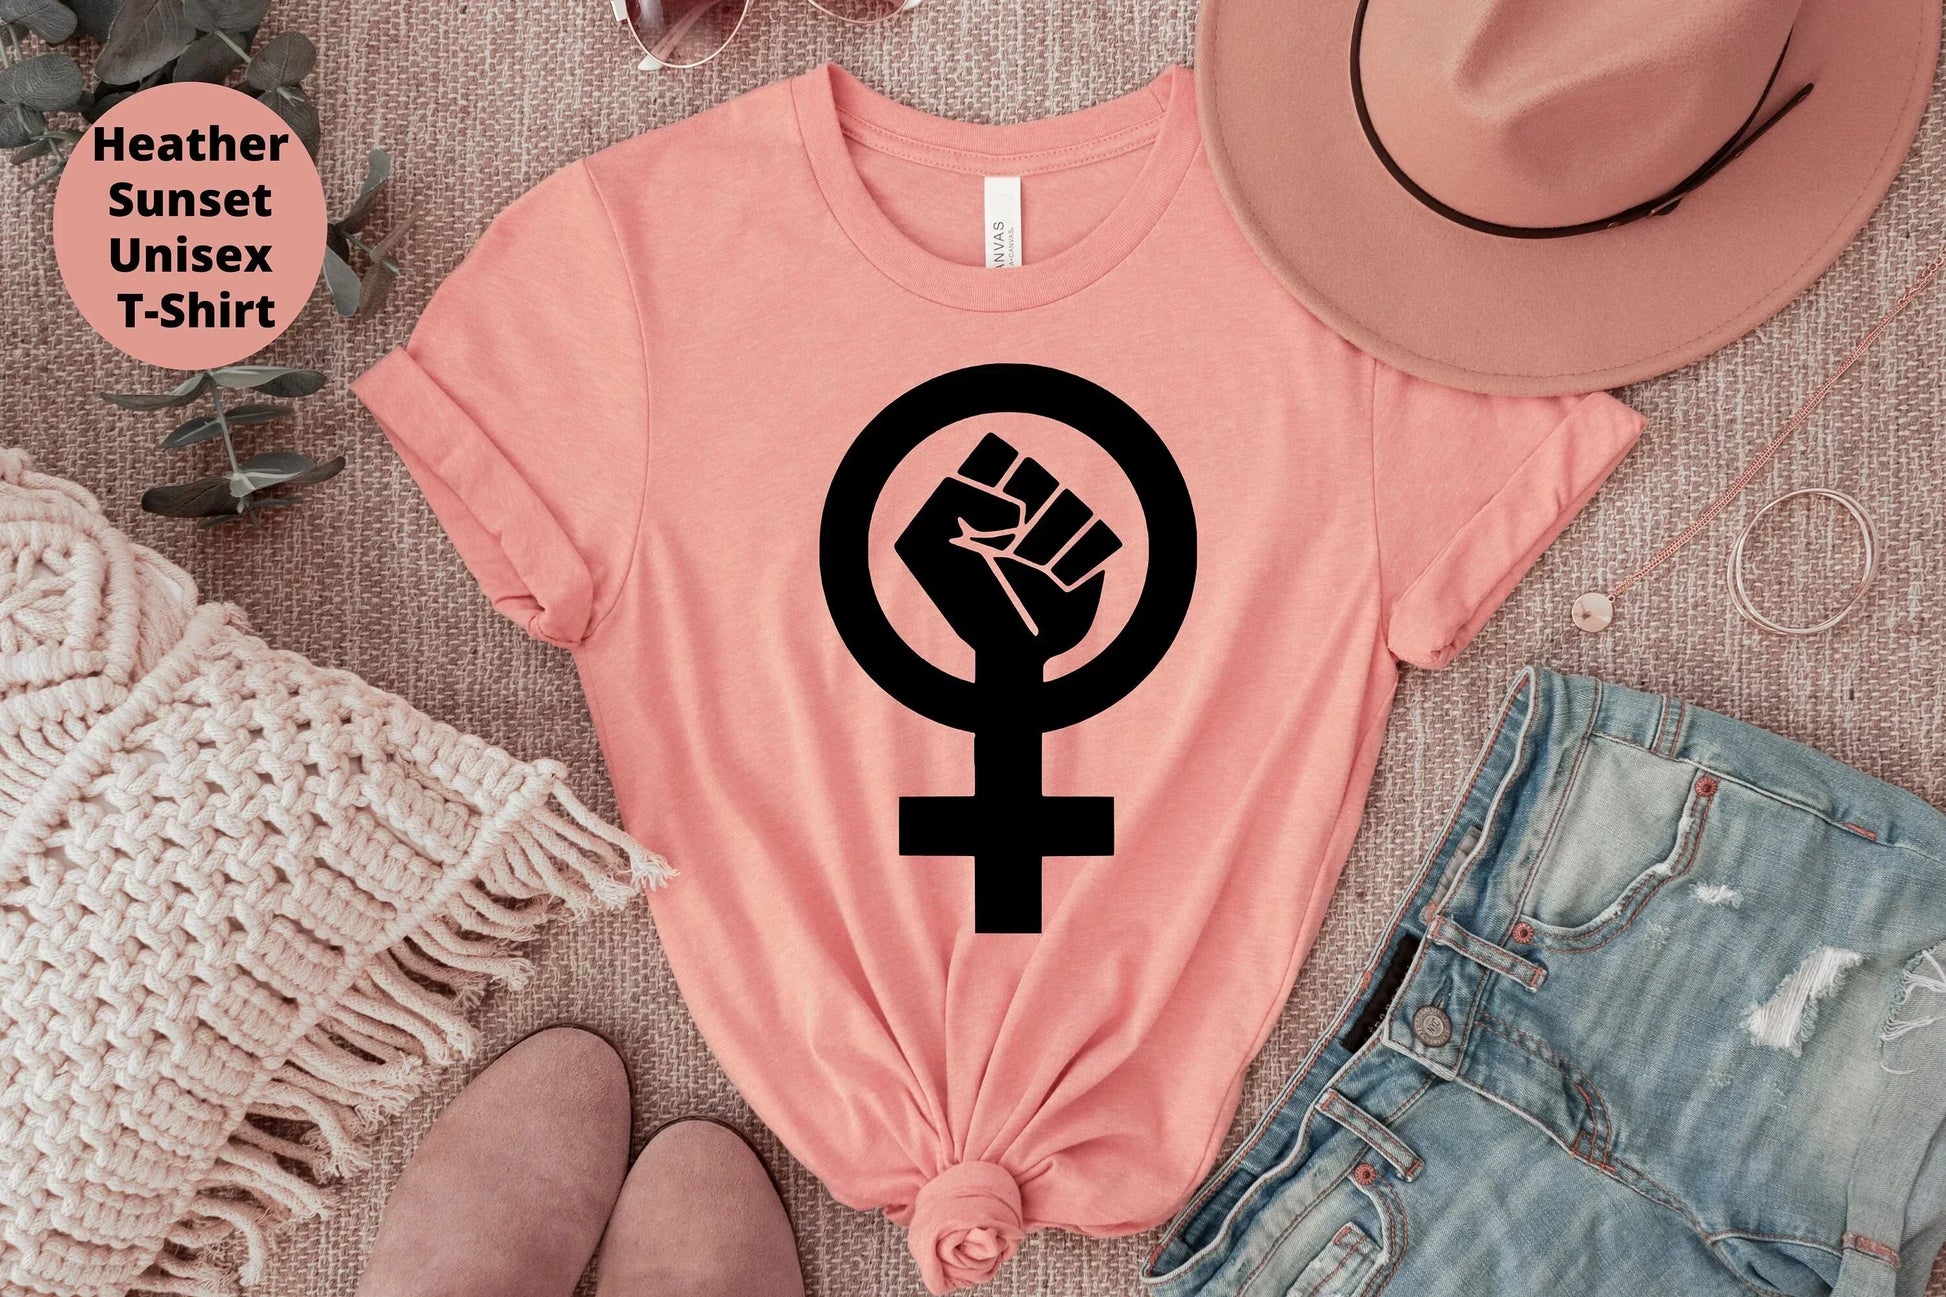 Protest T-Shirt, Abortion Rights, Female Pro Choice Shirt, Roe vs Wade, My Body My Choice Shirt,Activist,Equality Sweatshirt,Feminist Hoodie